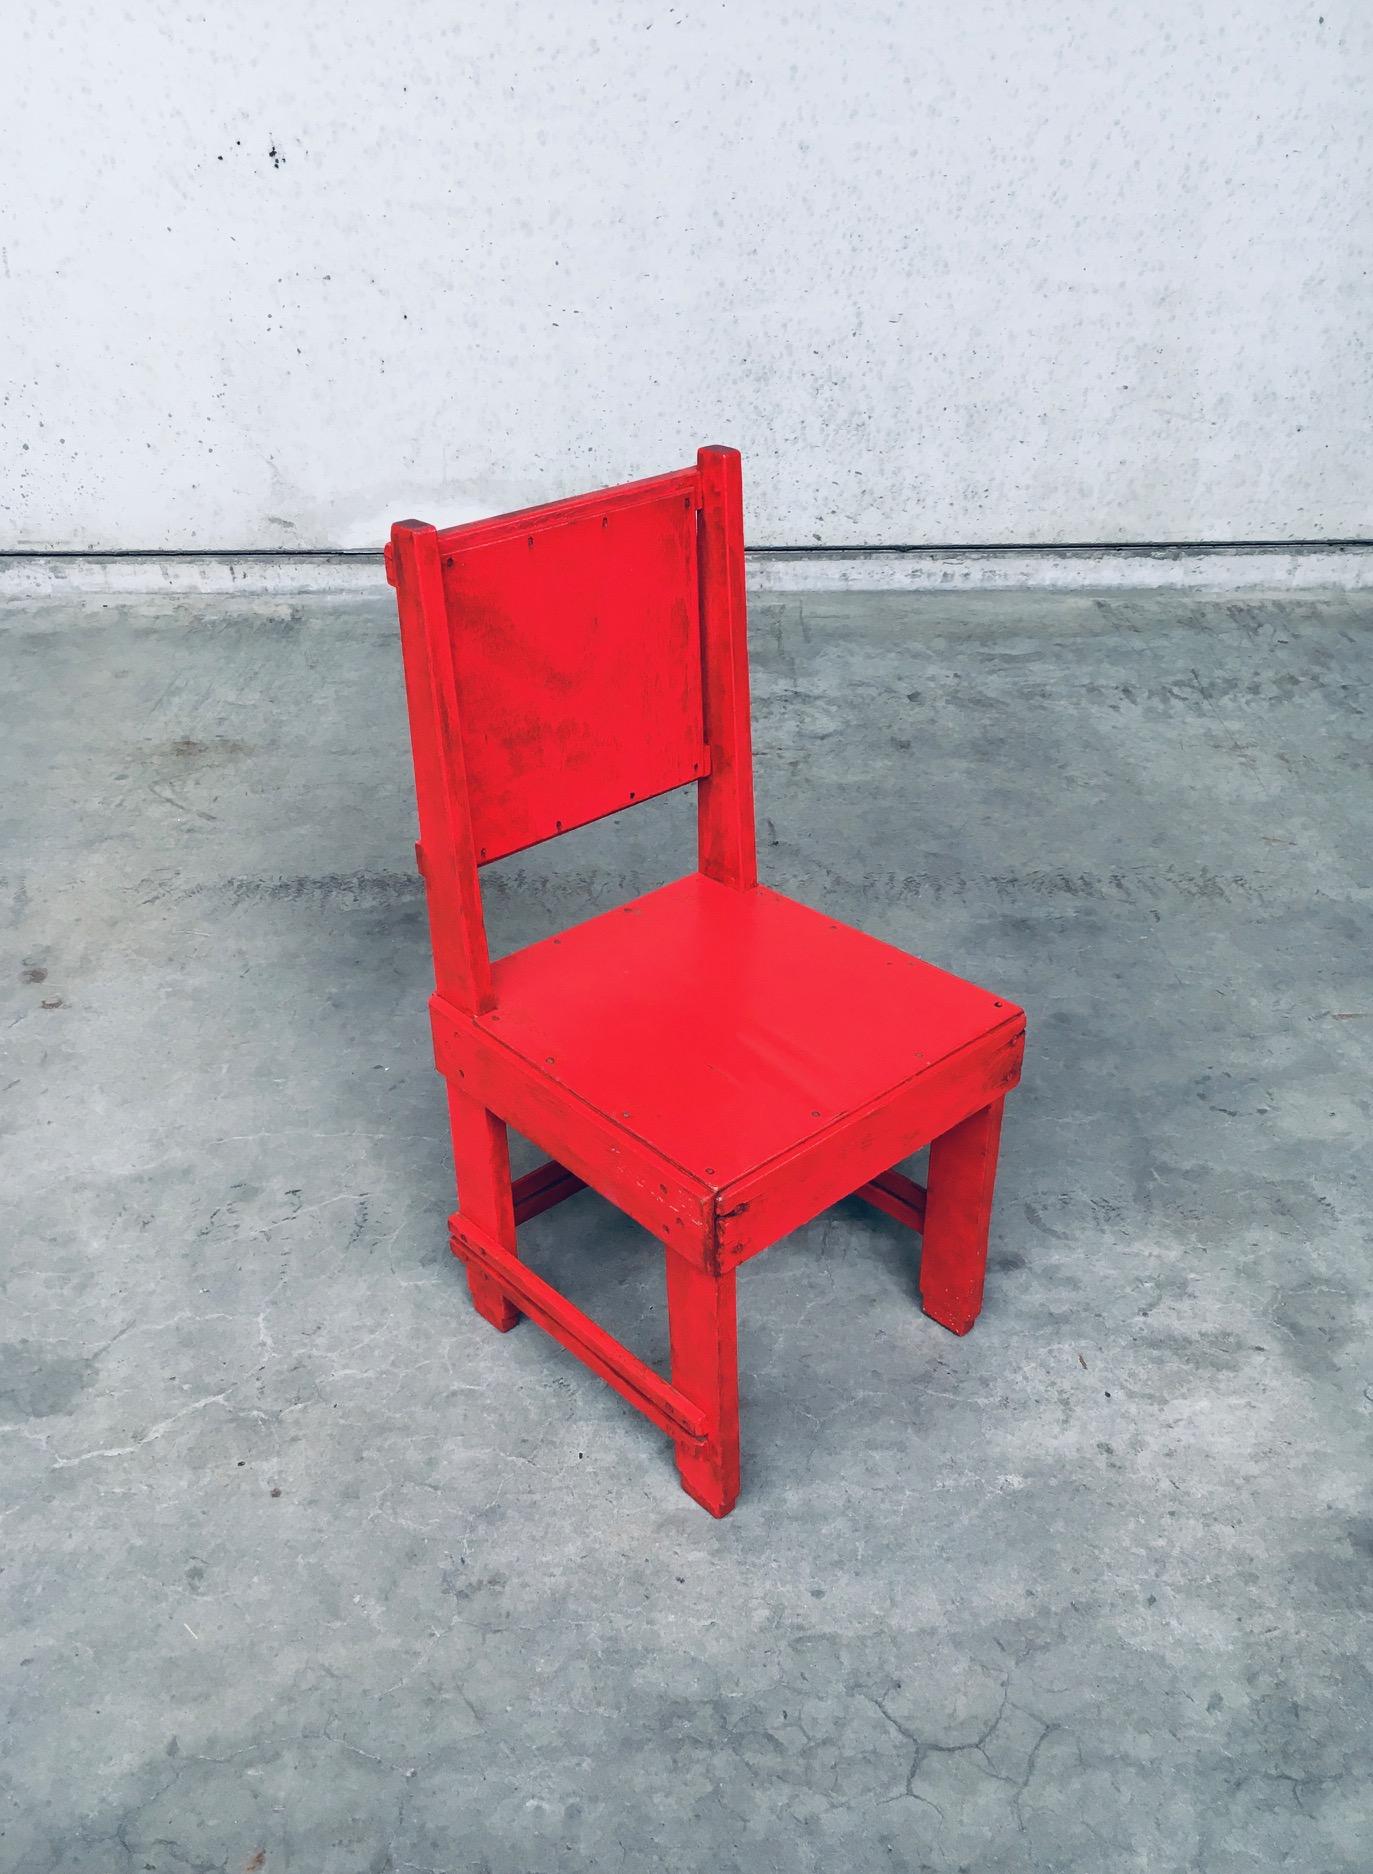 De Stijl Movement Design Red Chair Attributed to Jan Wils, 1920's Netherlands In Good Condition For Sale In Oud-Turnhout, VAN